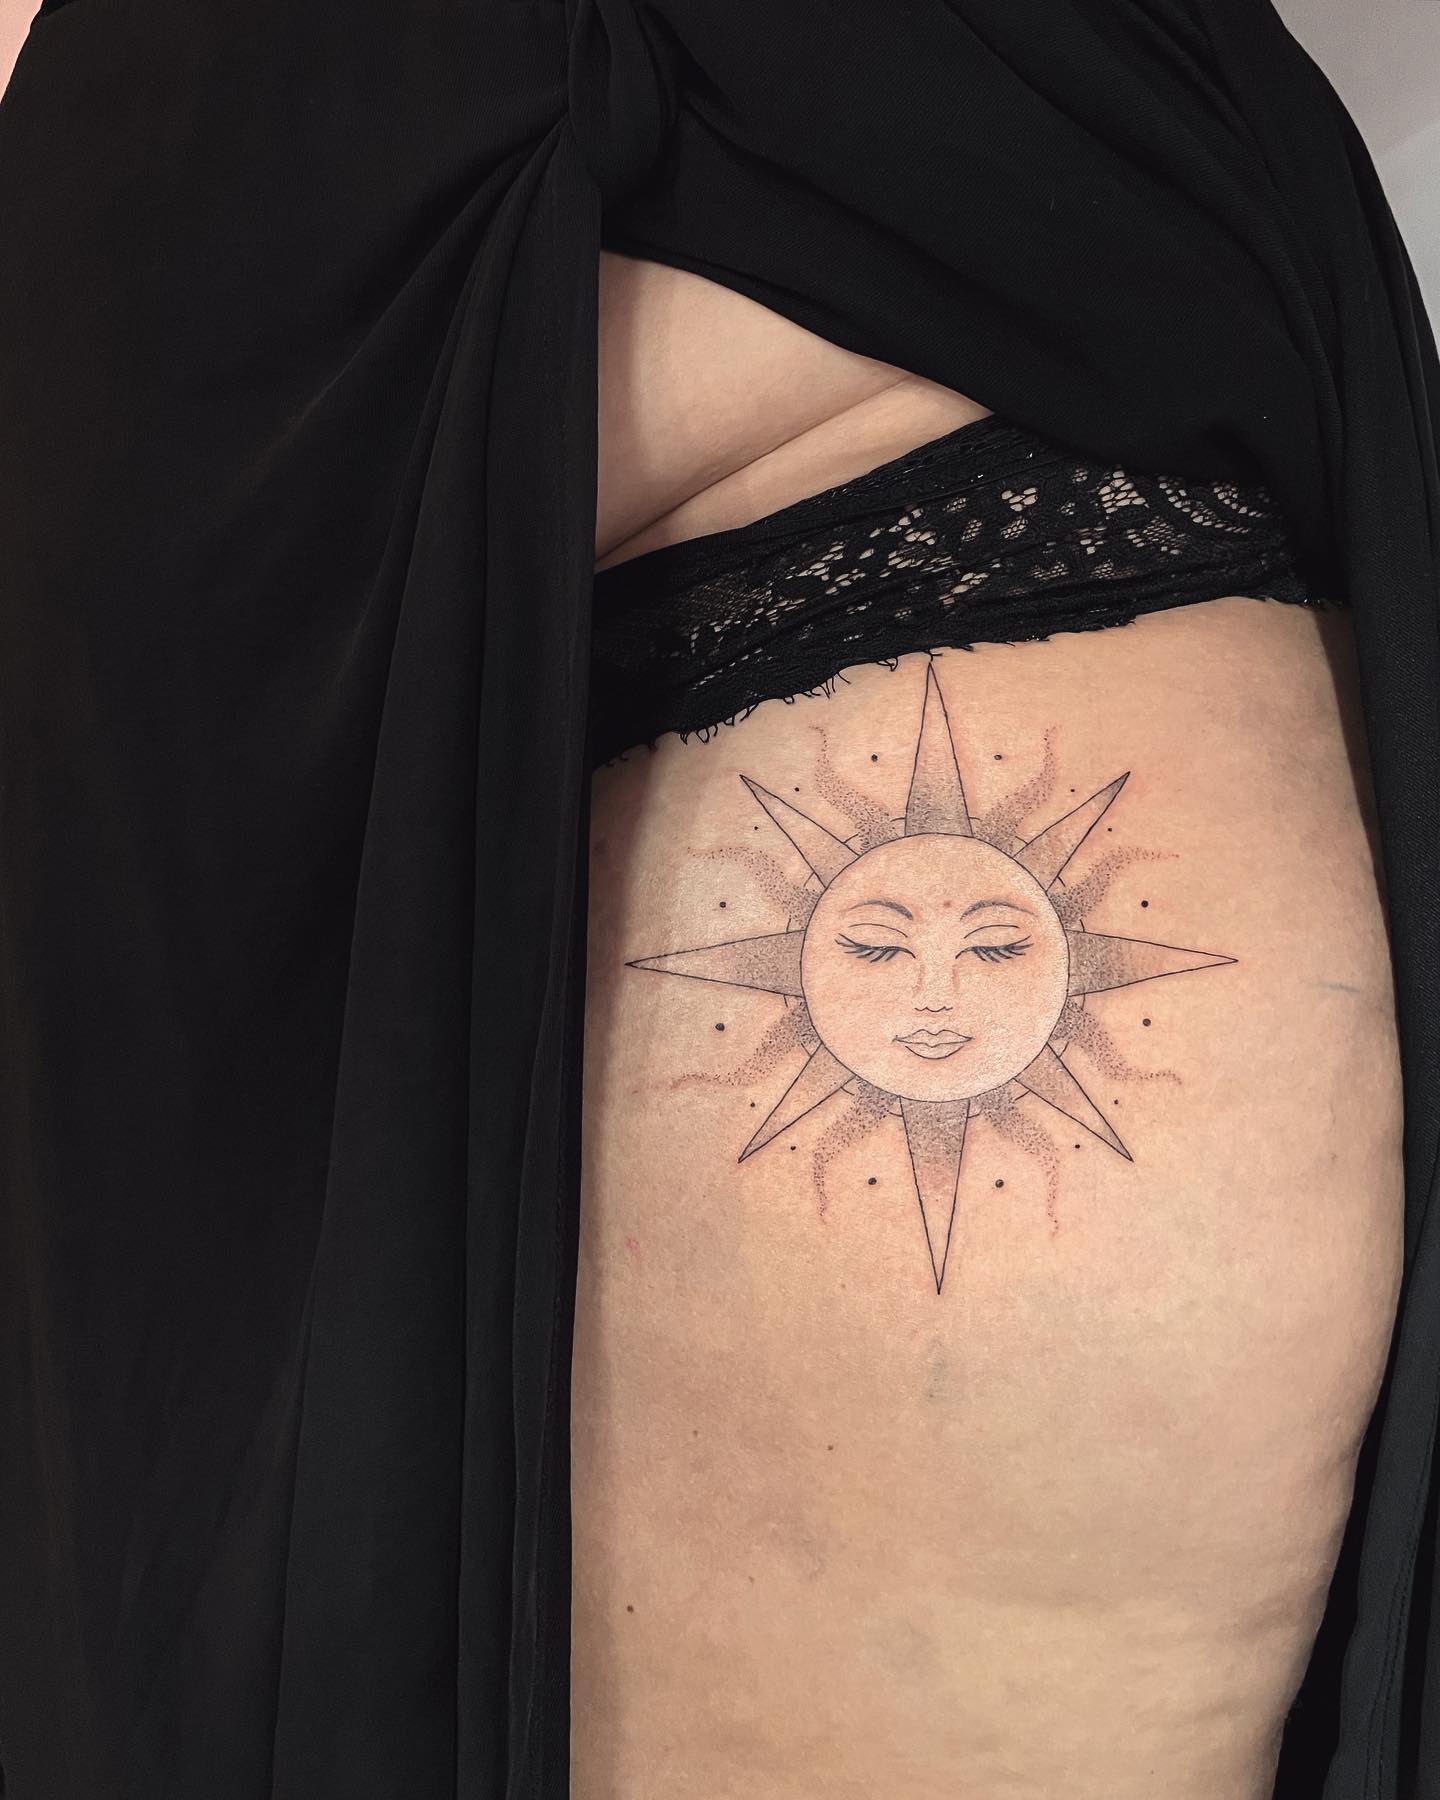 Women who are natural optimists and positive souls will enjoy this tattoo. Go for a sunshine print and let the world see your bold and cheerful look, along with your love for astrology and celestial pieces.